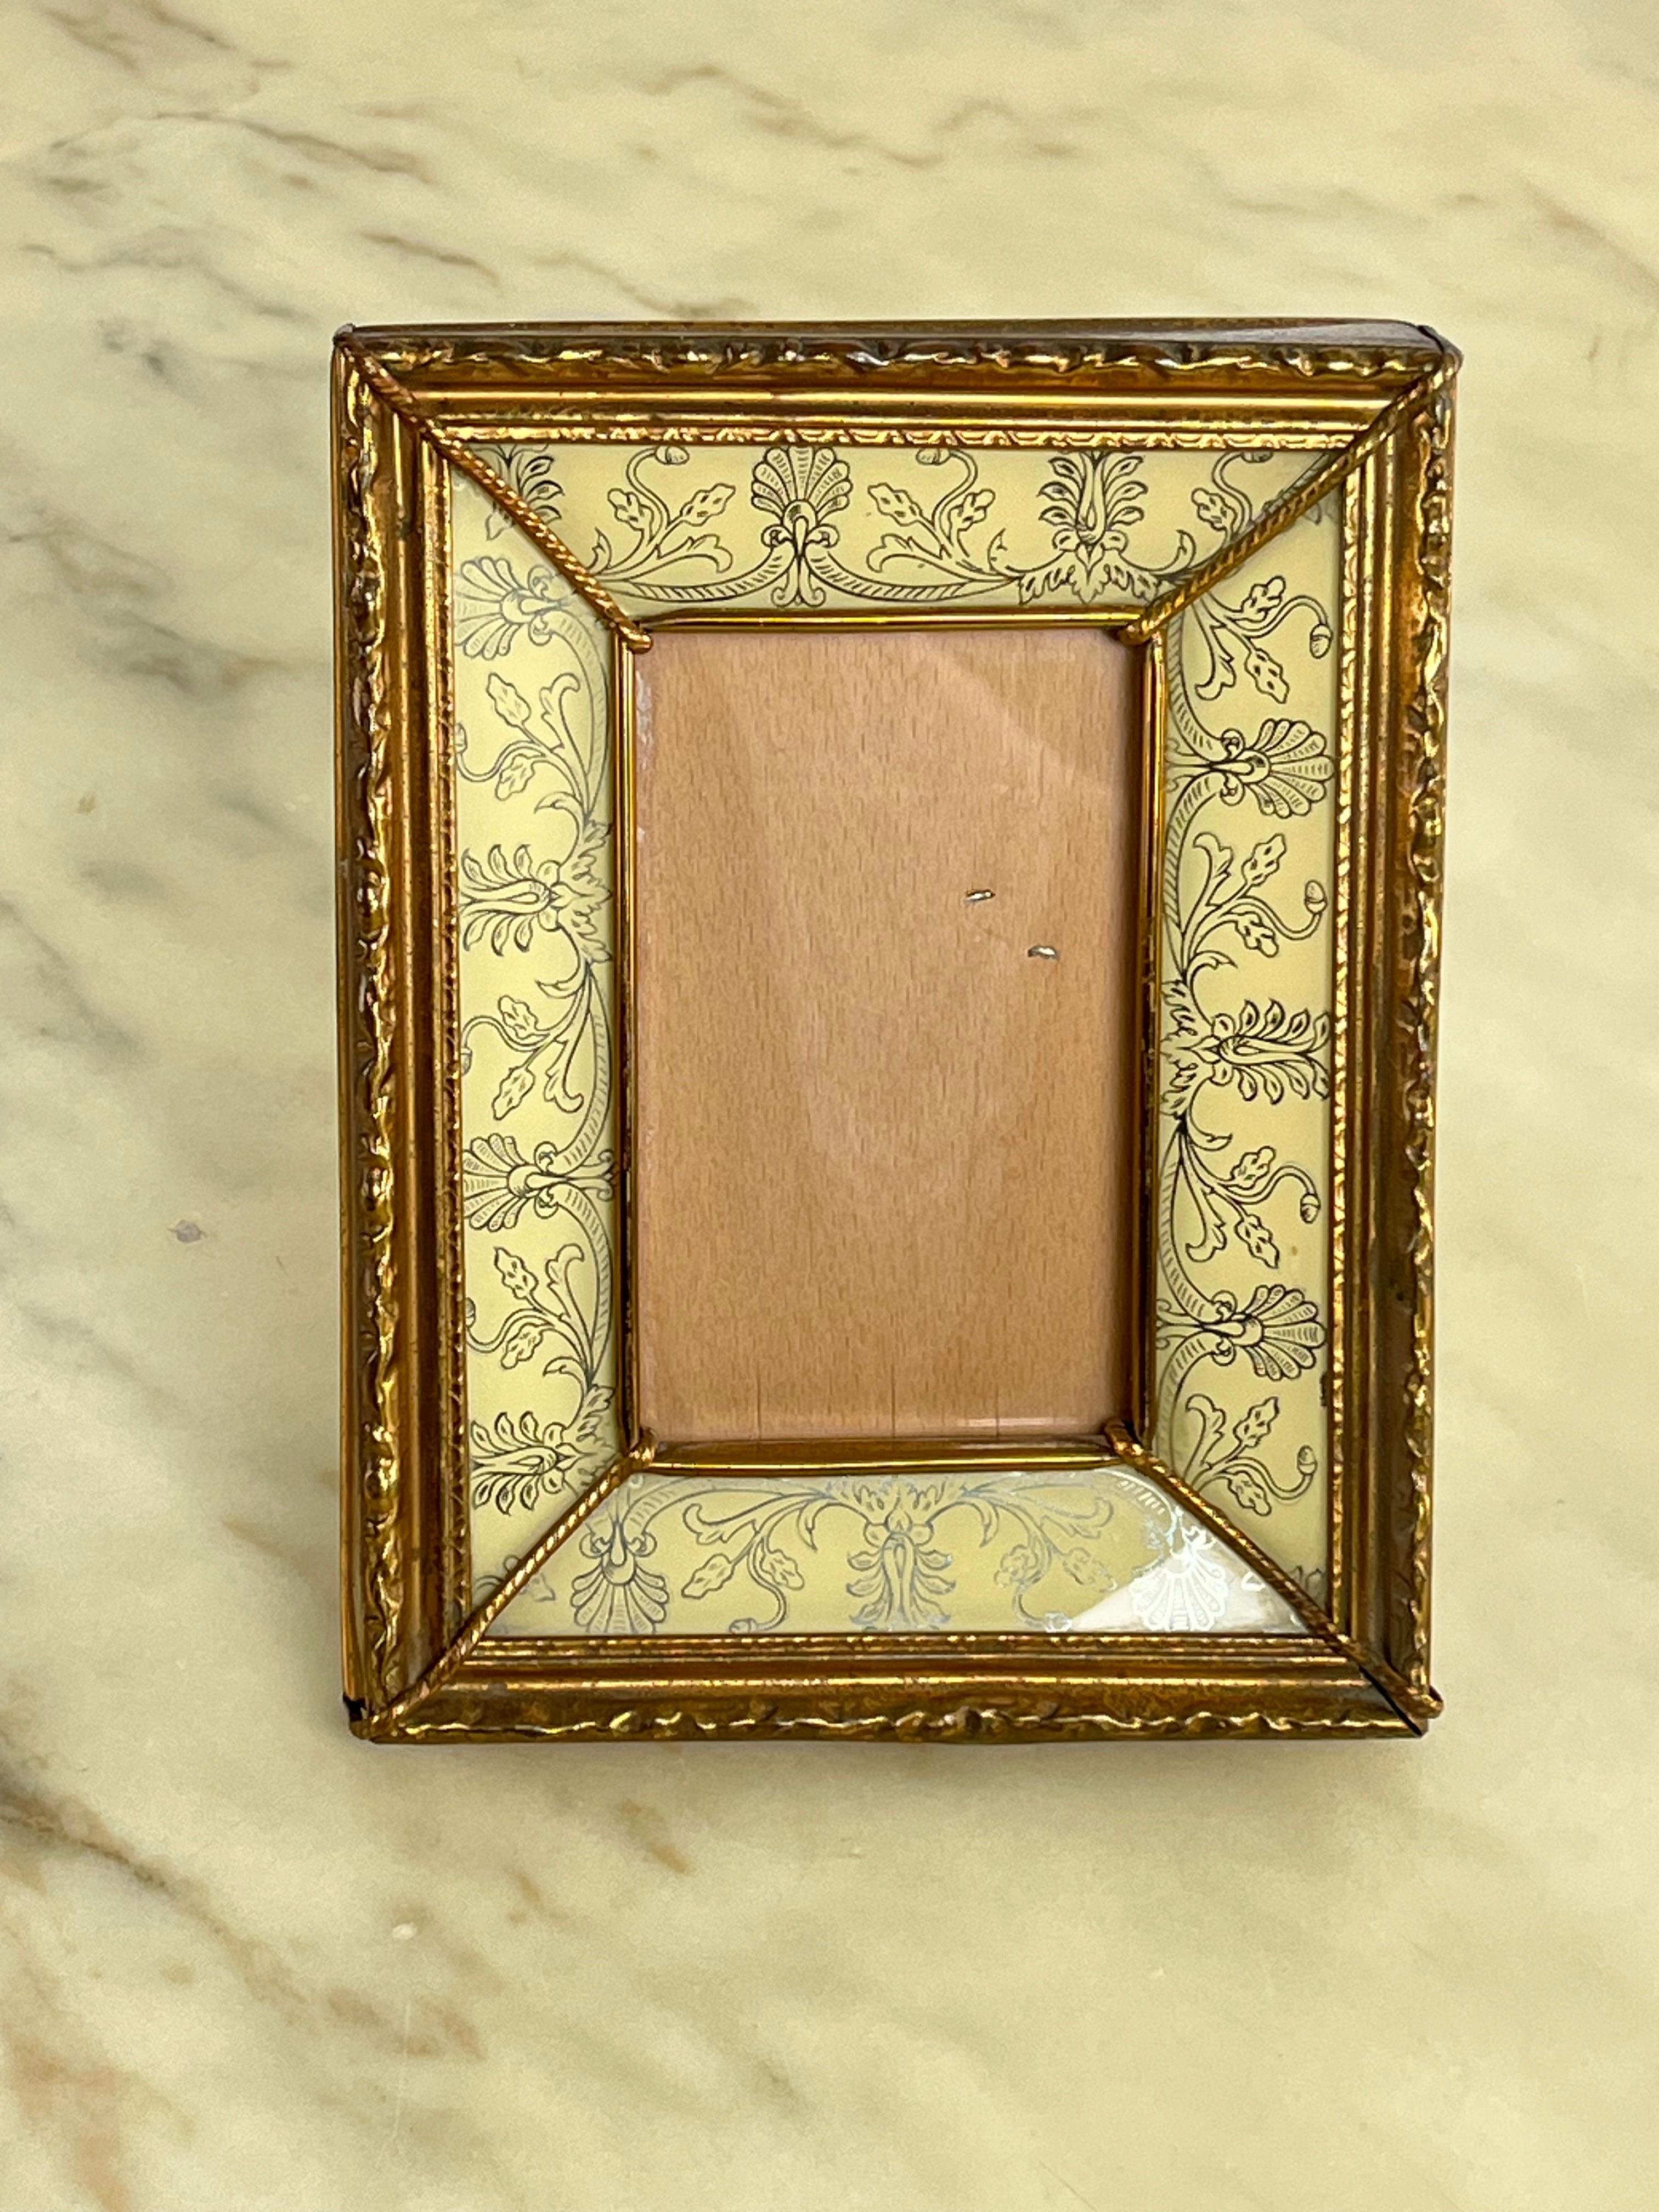 Mid-Century MB Italia Photo Frame  Brass Covered 1950s
Intact and in good condition, small signs of aging.
Photograph accommodation size 8 cm x 13 cm.